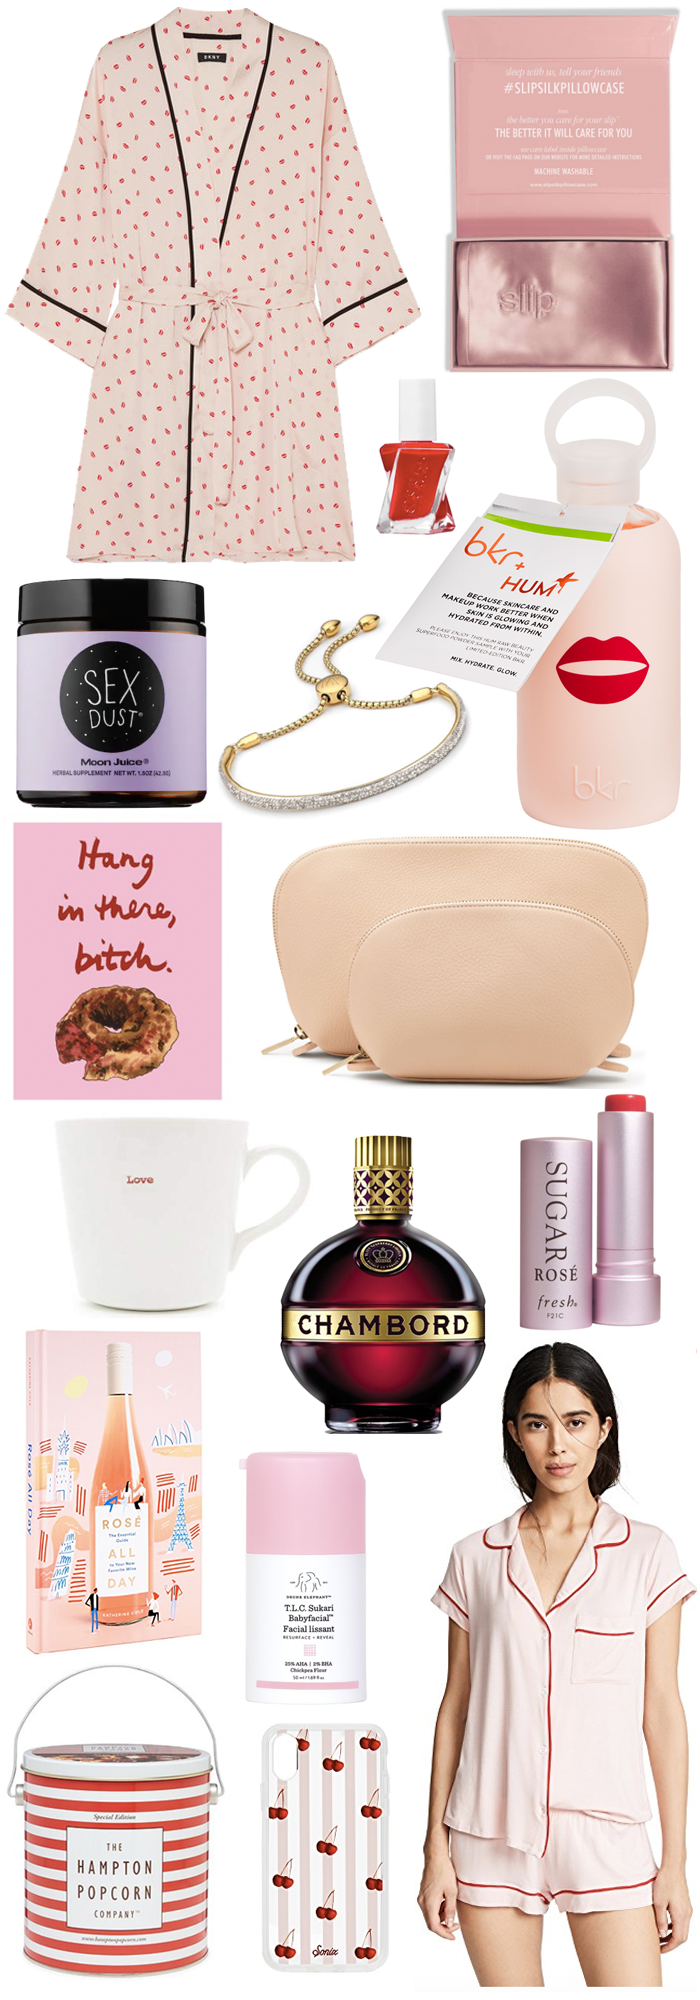 Valentine's Day gift ideas 2019 | These are great Valentine's Day gift ideas for her from $10 and up. 